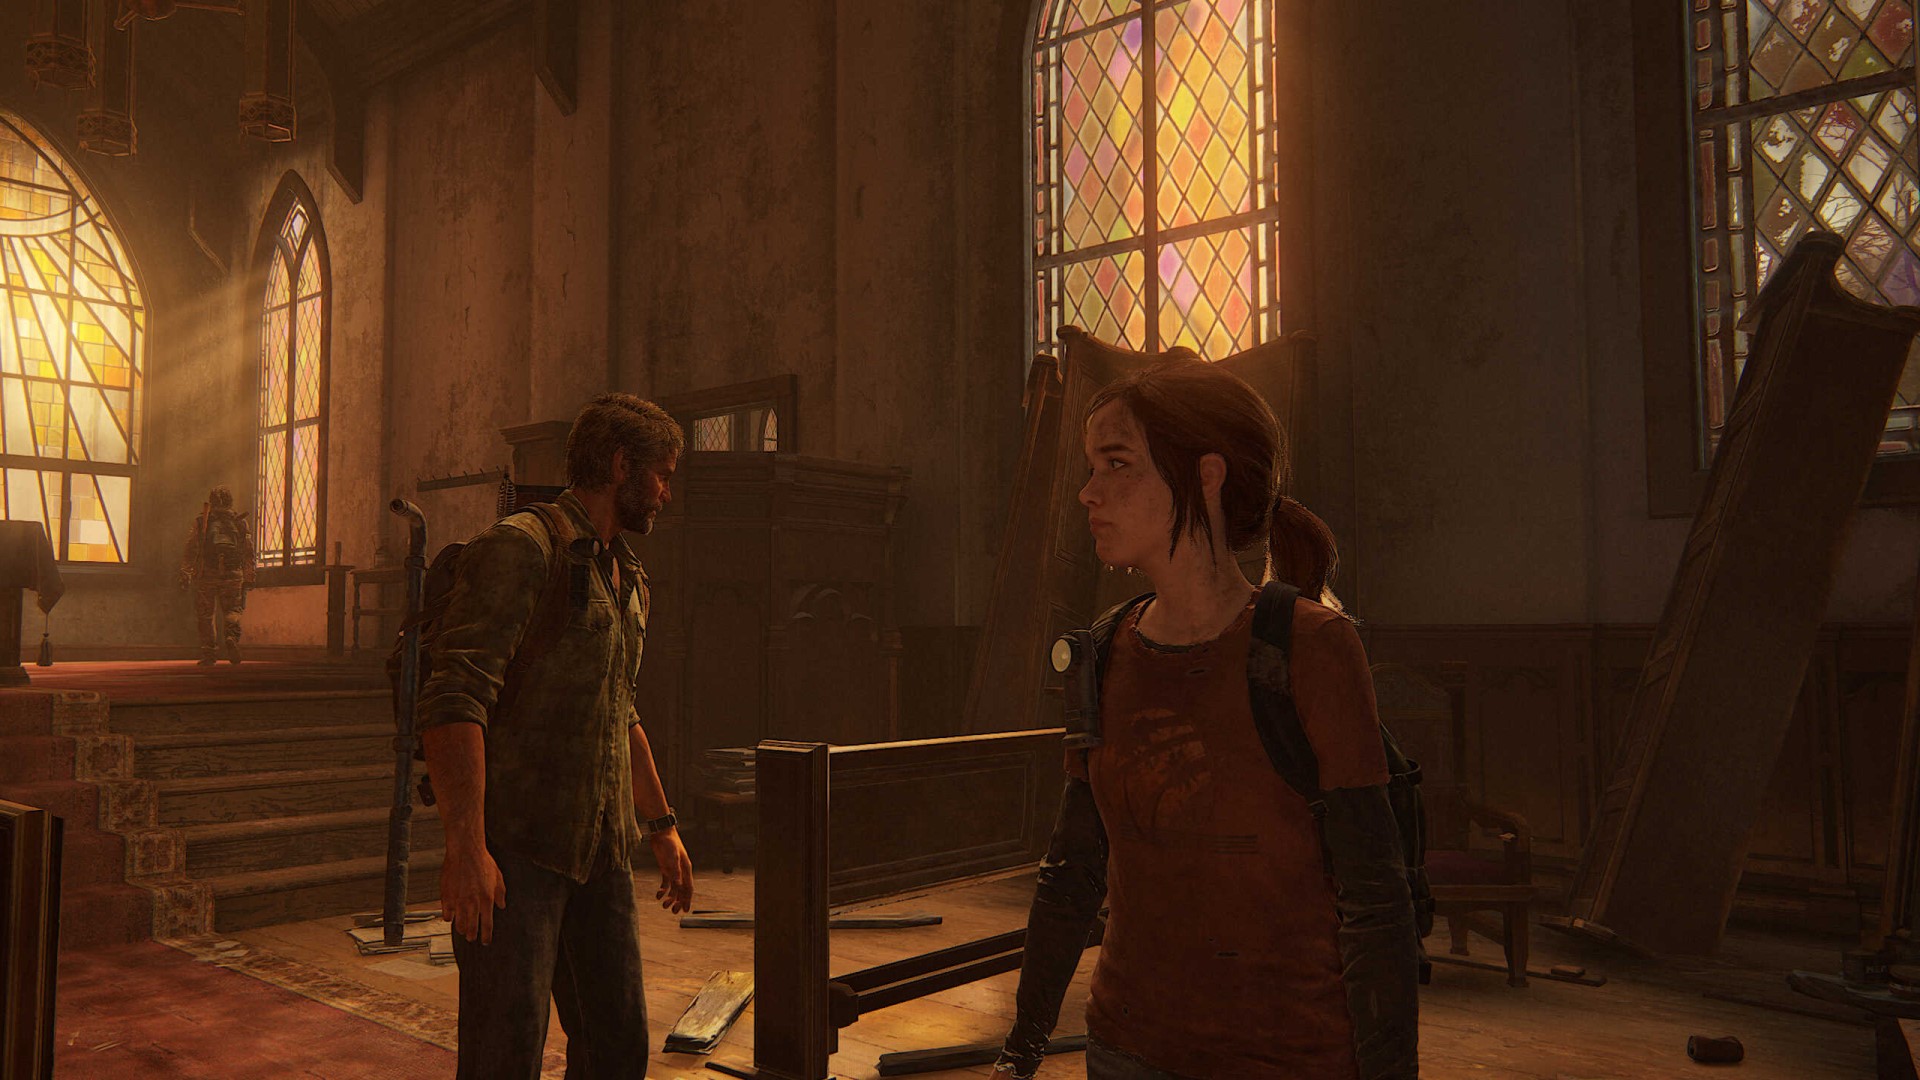 Naughty Dog Responds to AWFUL The Last of Us PC Port - Negative Steam  Reviews, Crashing + MORE! 